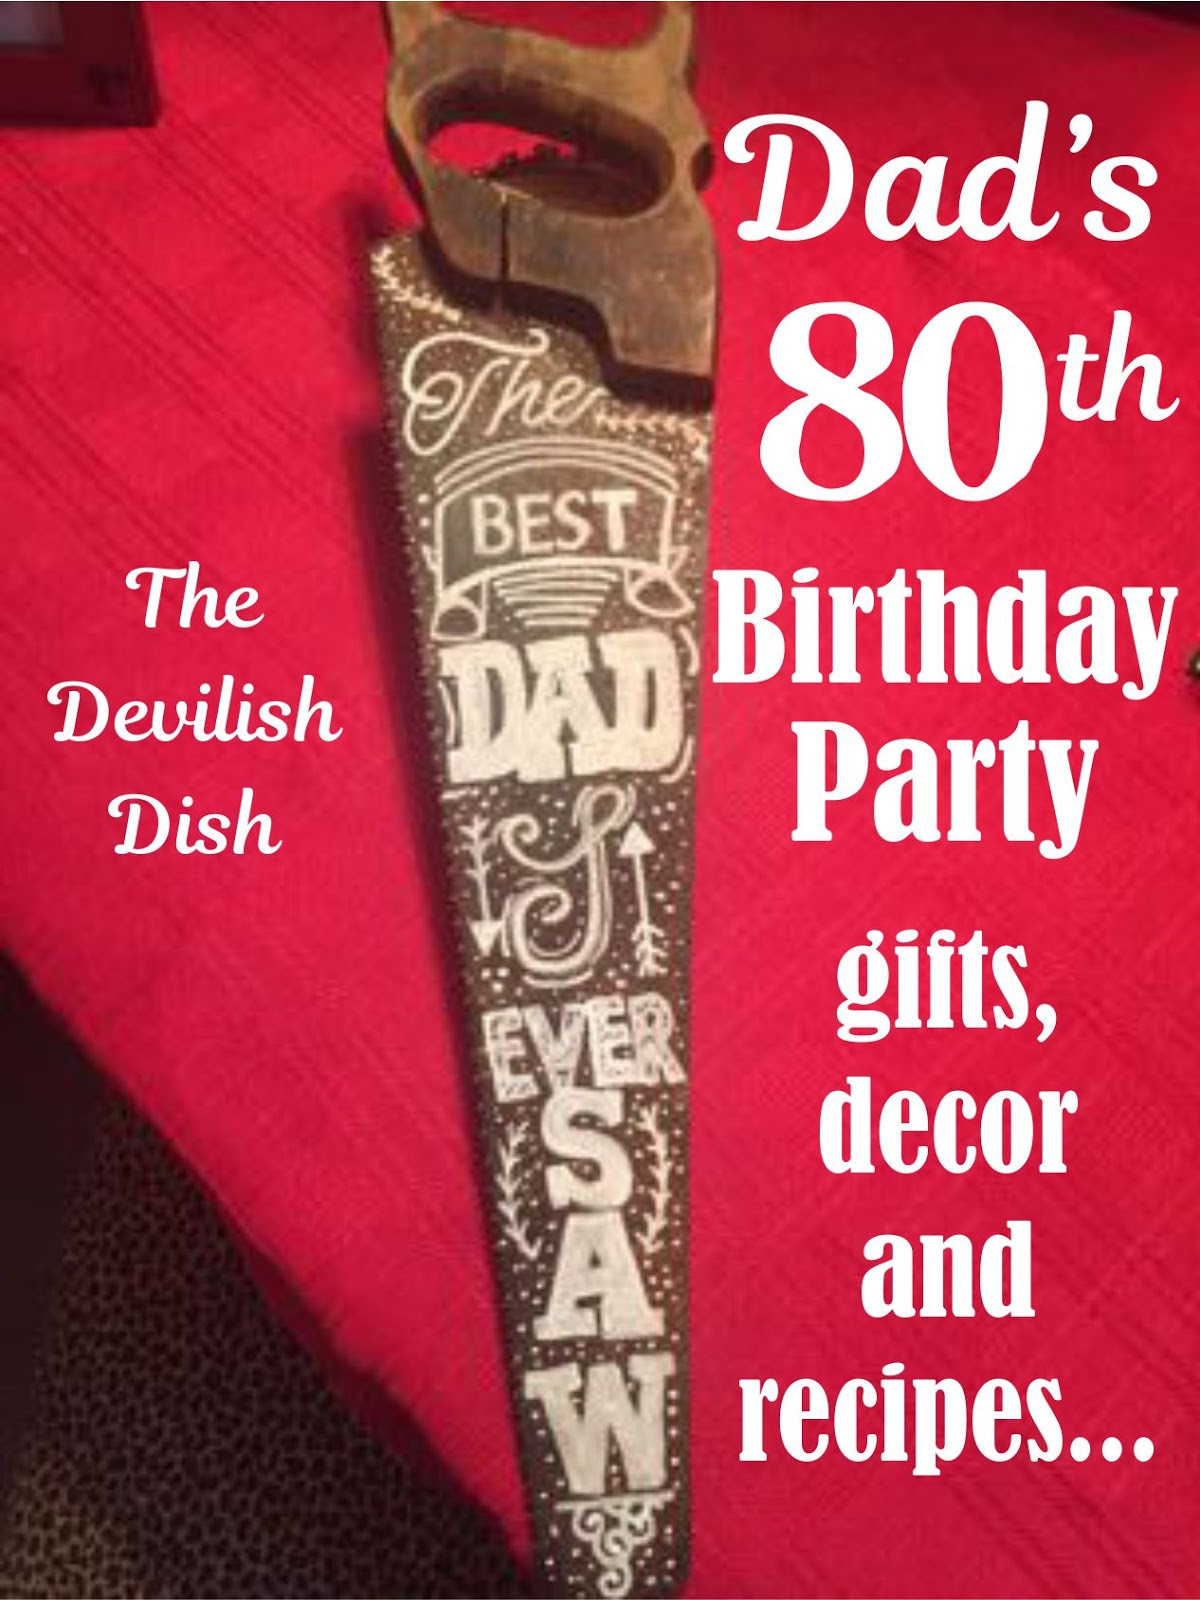 80Th Birthday Gift Ideas For Dad
 The Devilish Dish Dad s 80th Birthday Party with Gifts